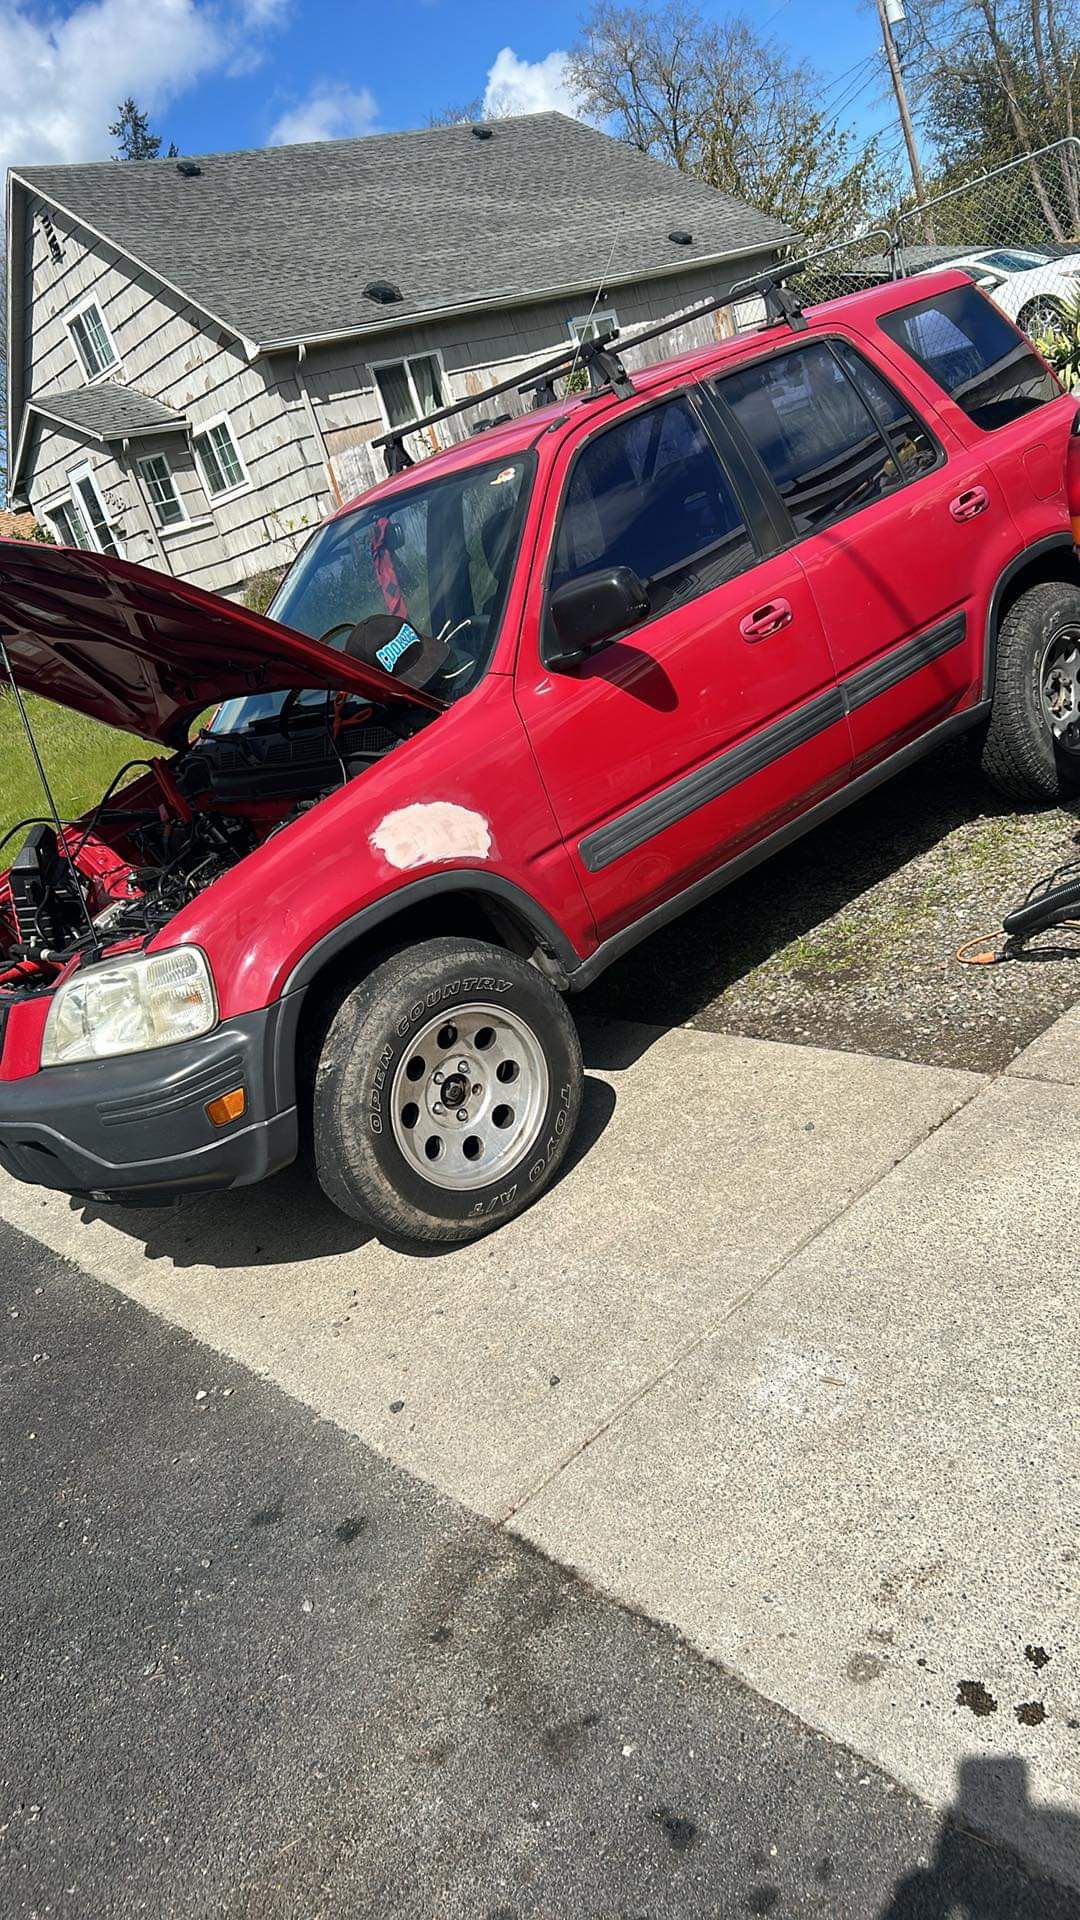 Parting Out 99 Crv 